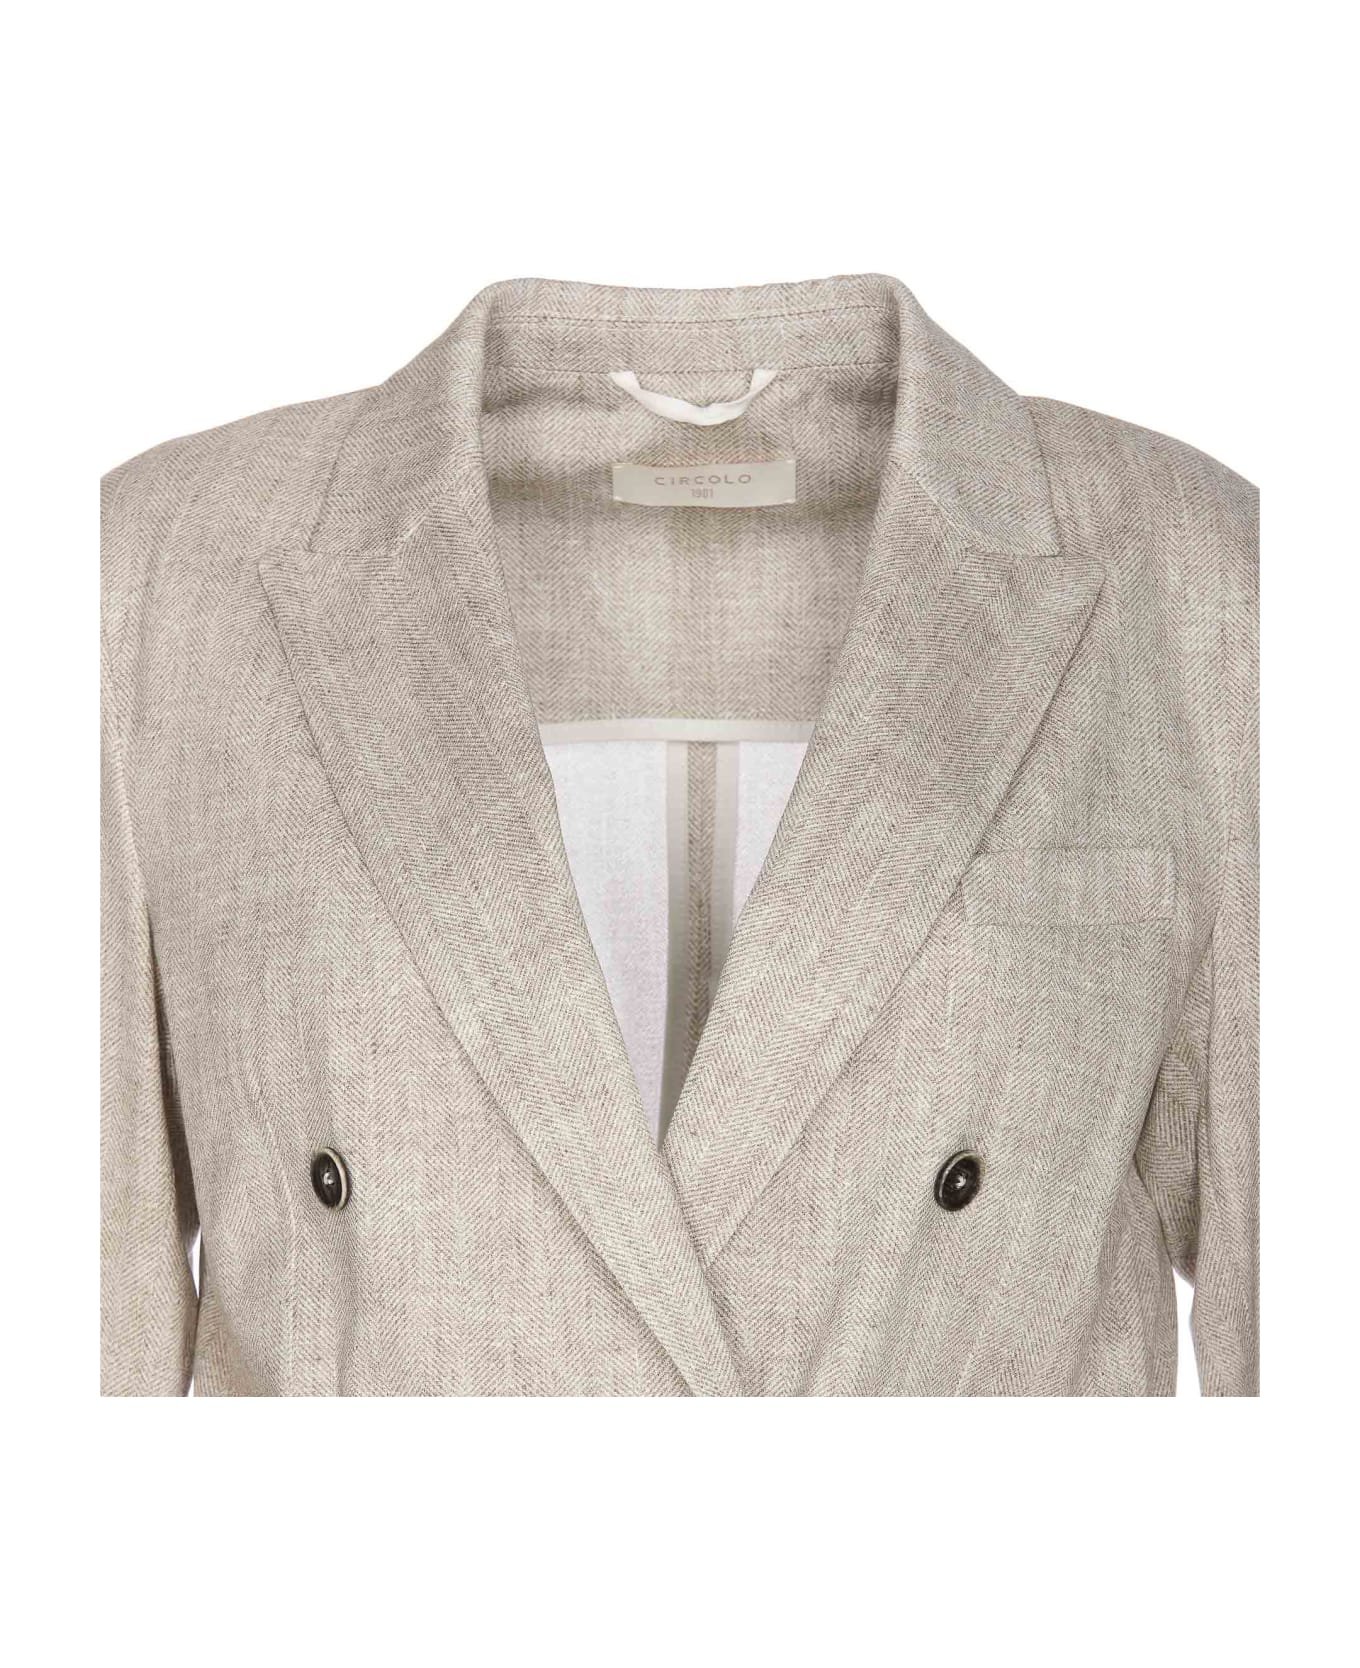 Circolo 1901 Double Breasted Jacket - Beige